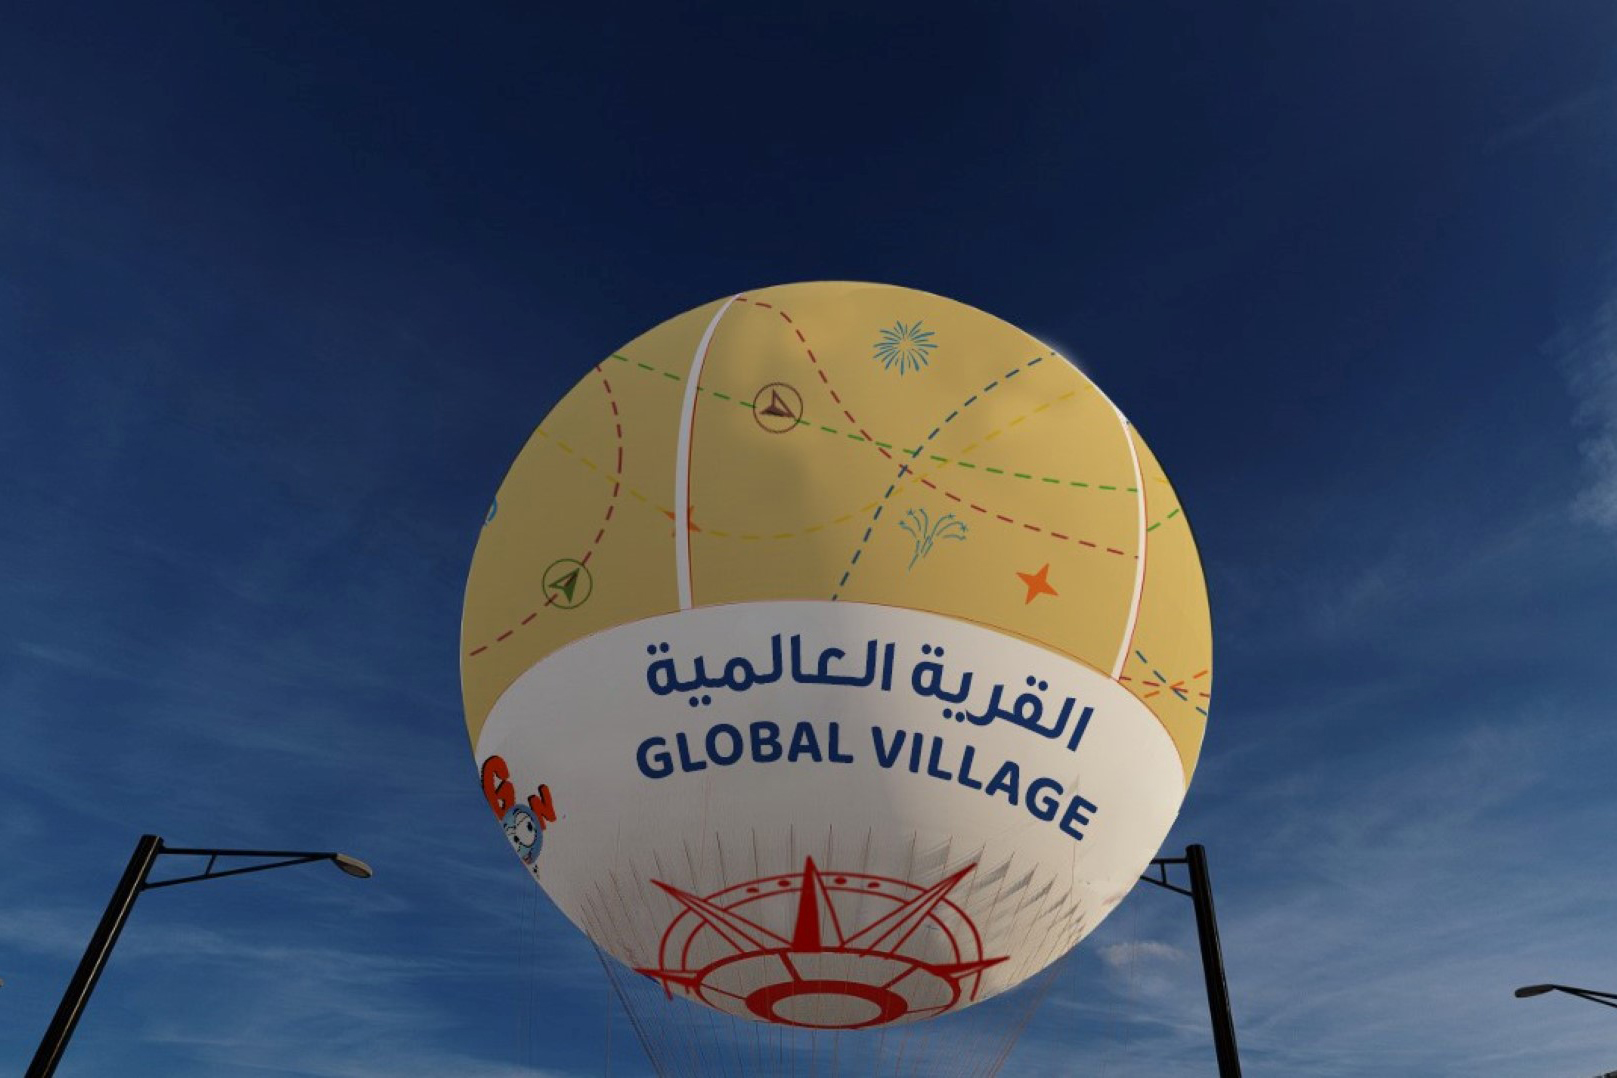 'Global Village Big Balloon' ride set to take guests to new heights for Season 27